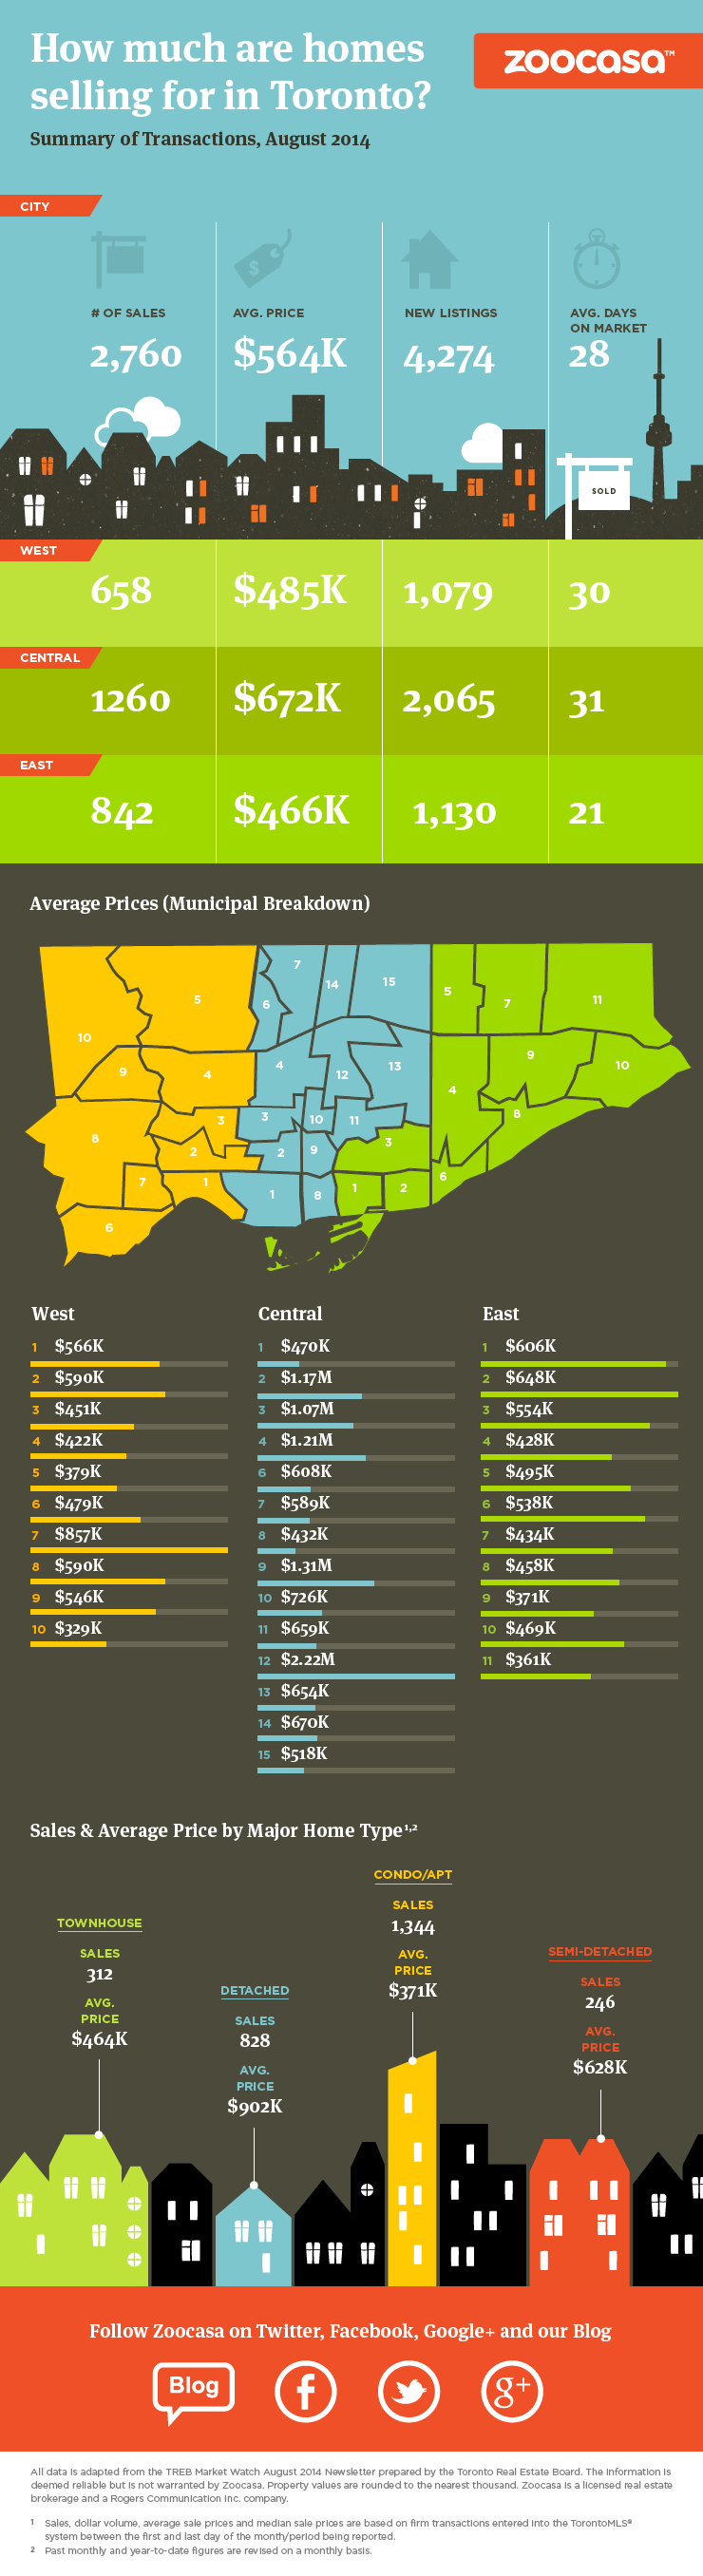 toronto-home-sales-prices-august-2014